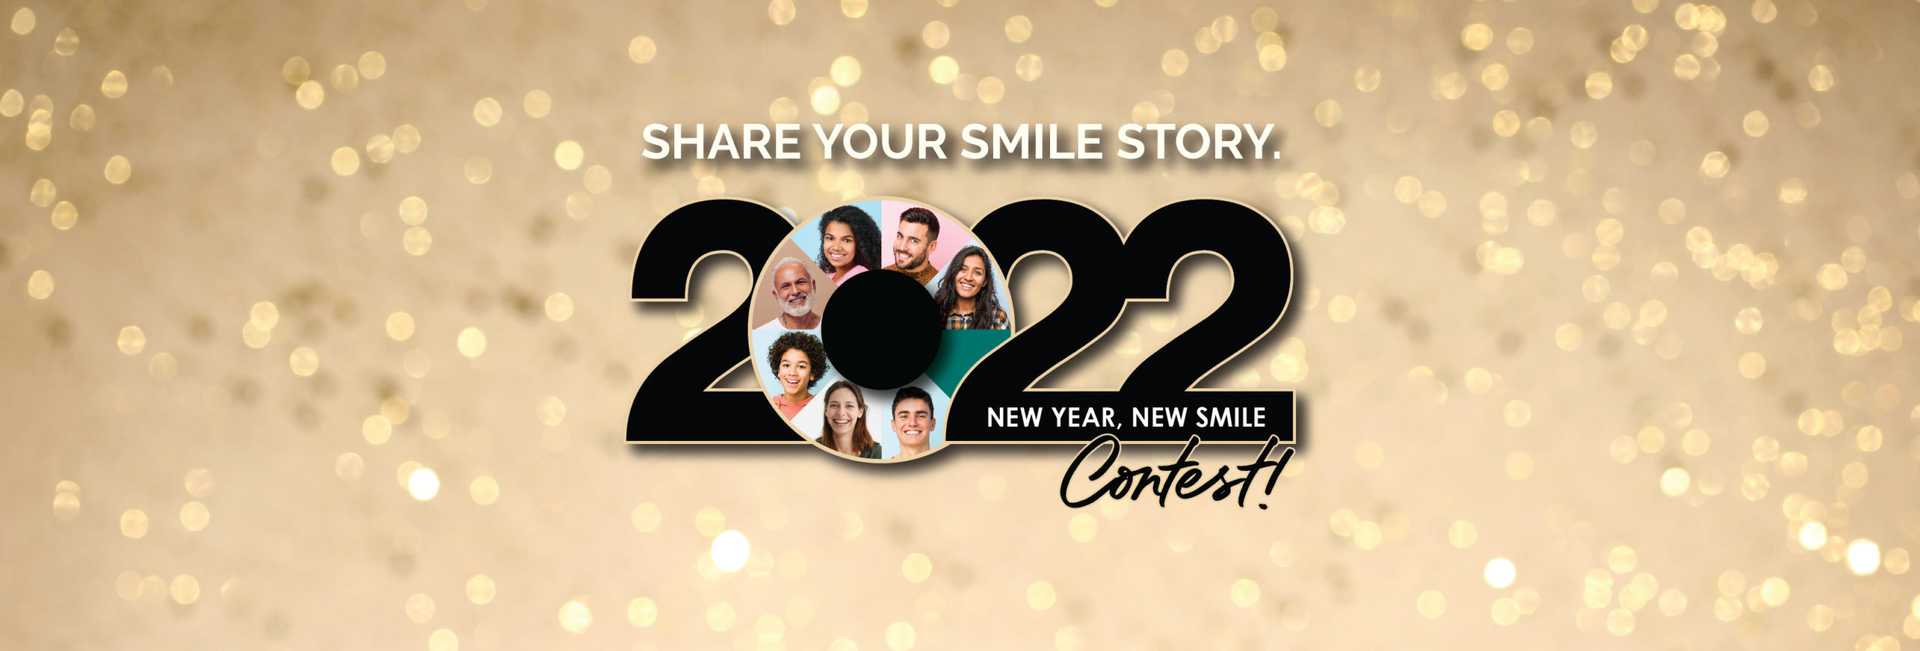 New Year New You Contest Blog Header 01